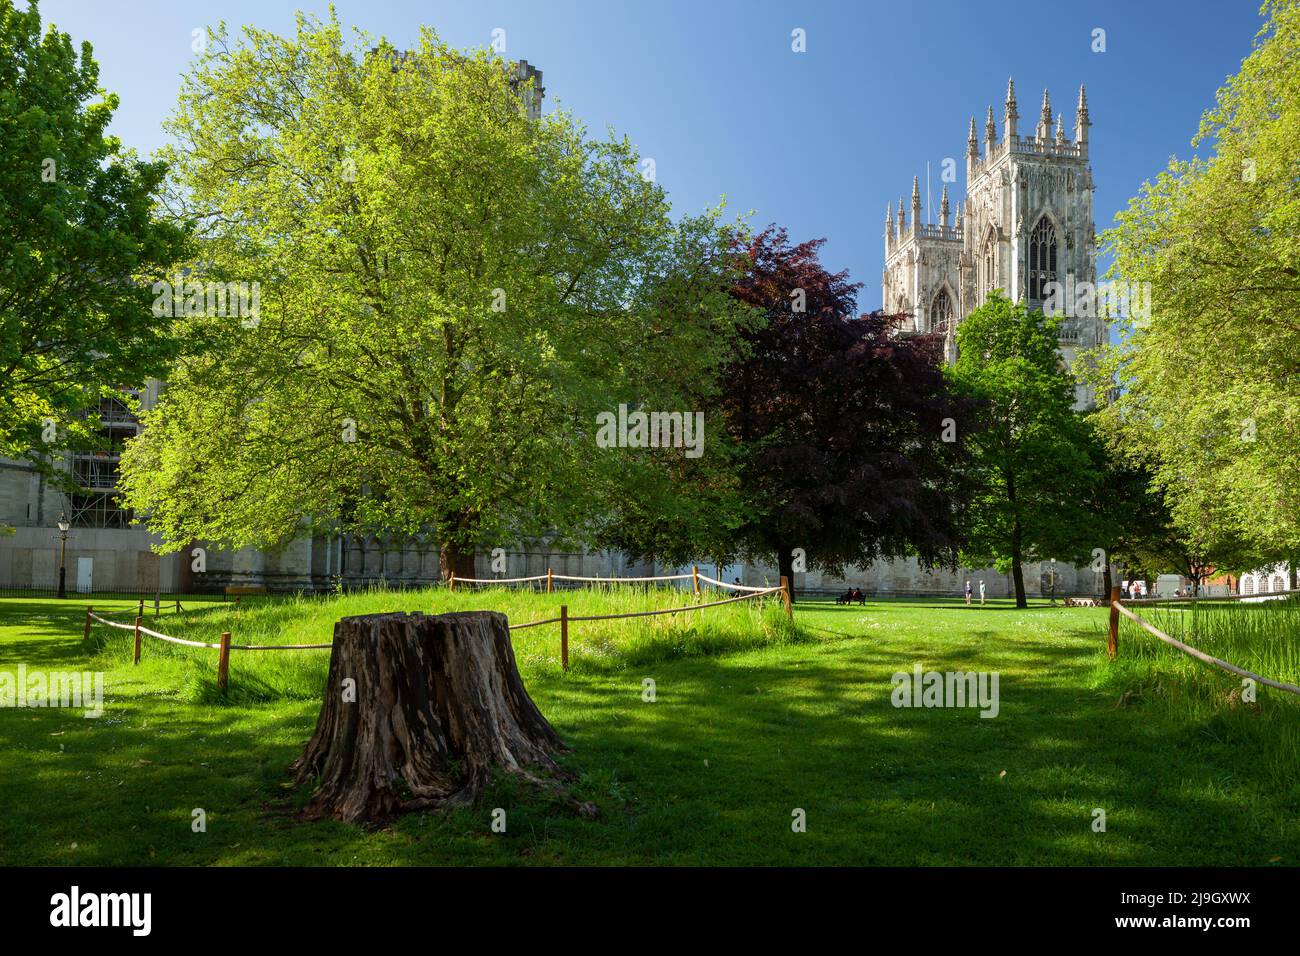 Morning at Dean's Park in York, England. The towers of York Minster in the distance. Stock Photo